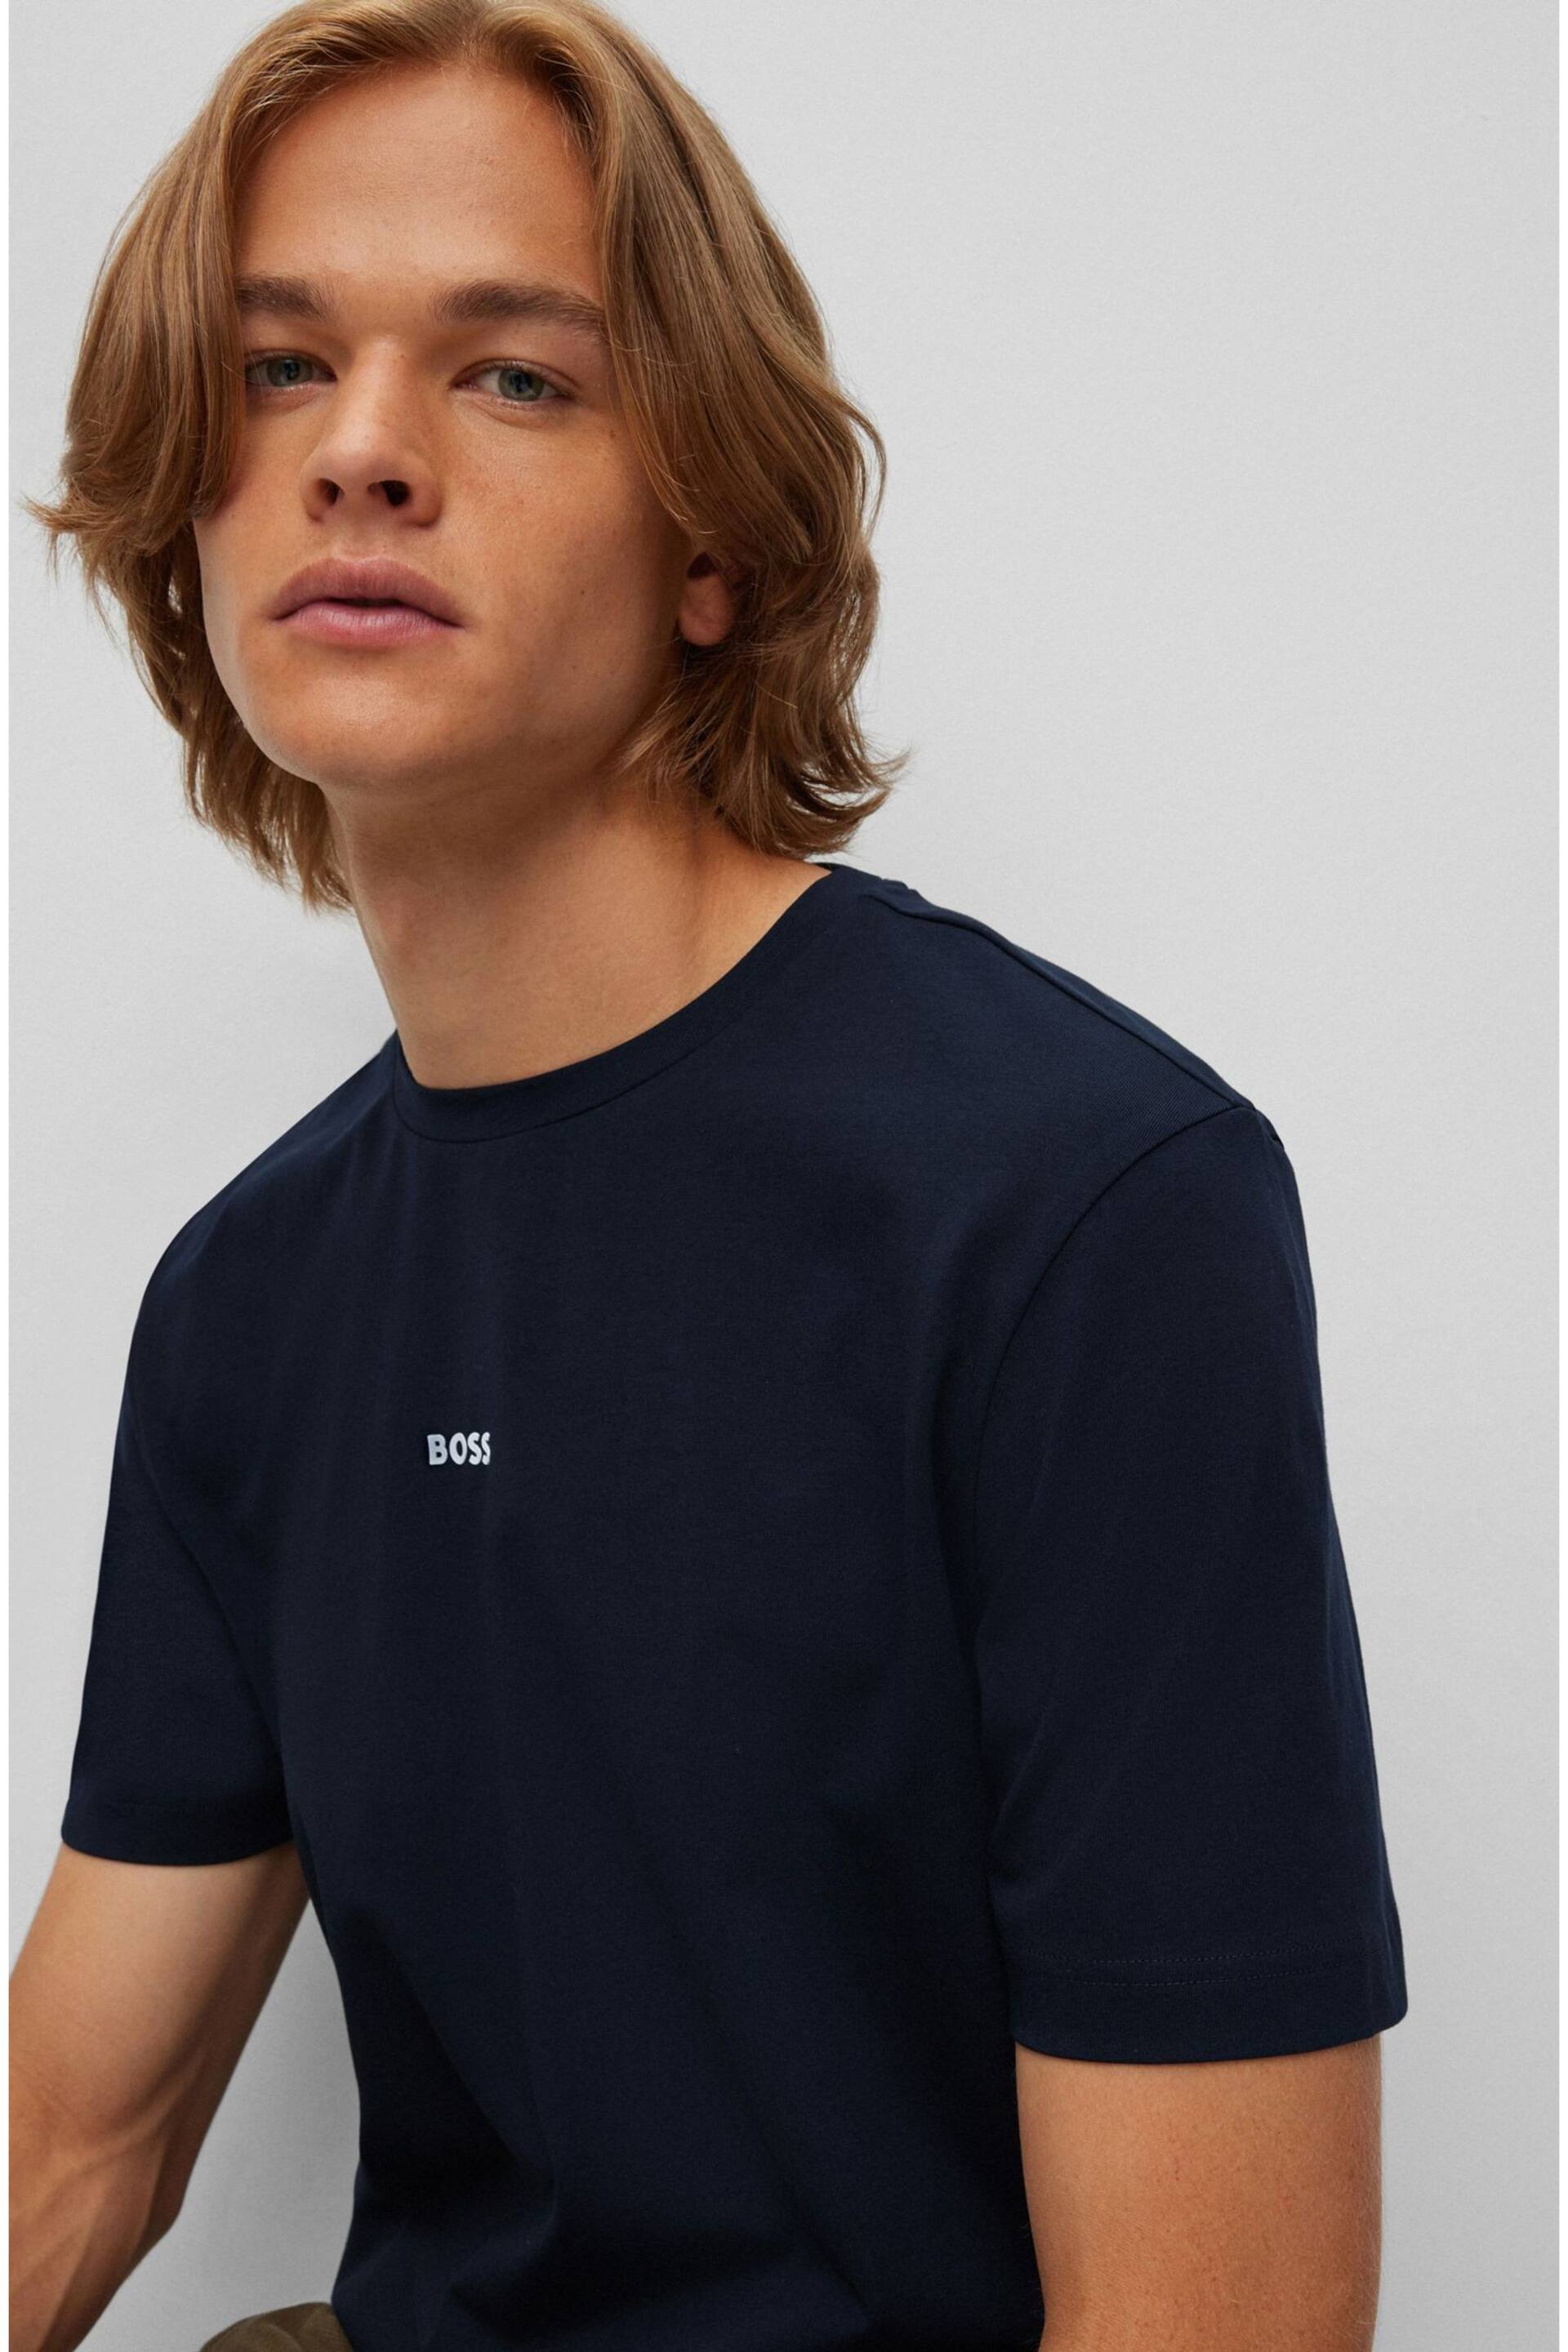 BOSS Dark Blue Relaxed Fit Central Logo T-Shirt - Image 4 of 4